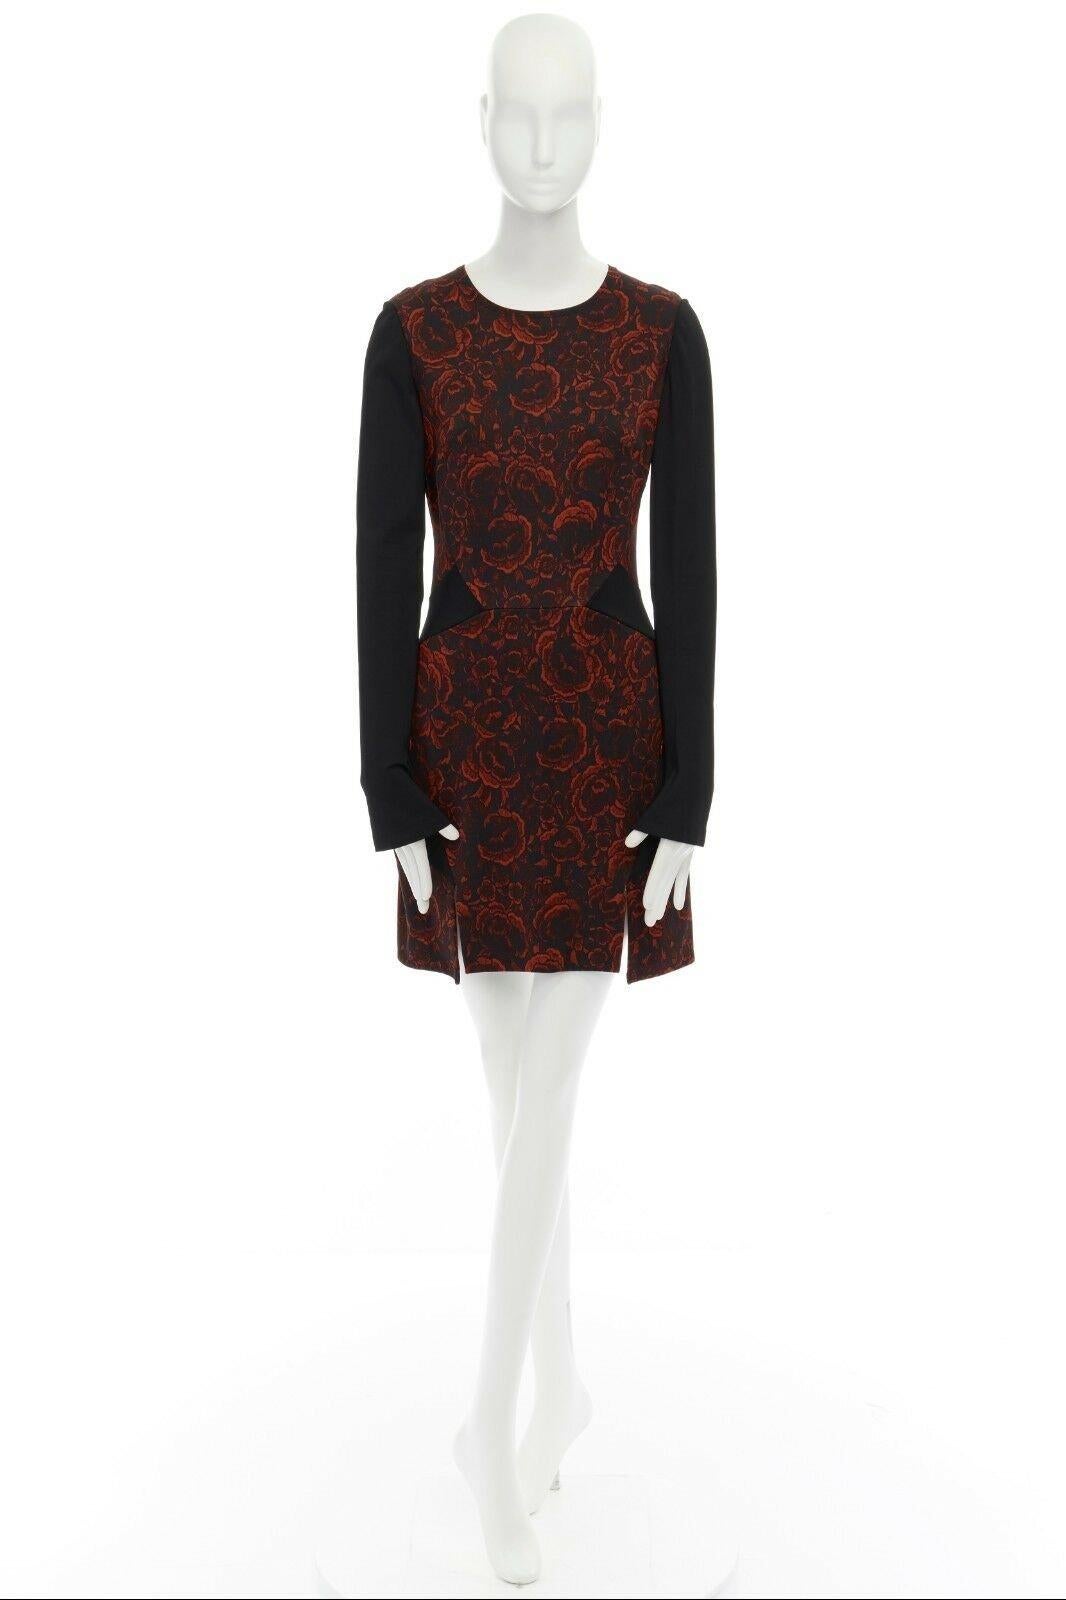 JUST CAVALLI red floral print black panelled dual slit bodycon cocktail dress S Reference: MYSD/A00015 
Brand: Just Cavalli 
Designer: Roberto Cavalli 
Material: Viscose 
Color: Red 
Pattern: Floral 
Closure: Zip 
Extra Detail: Viscose, elastane.